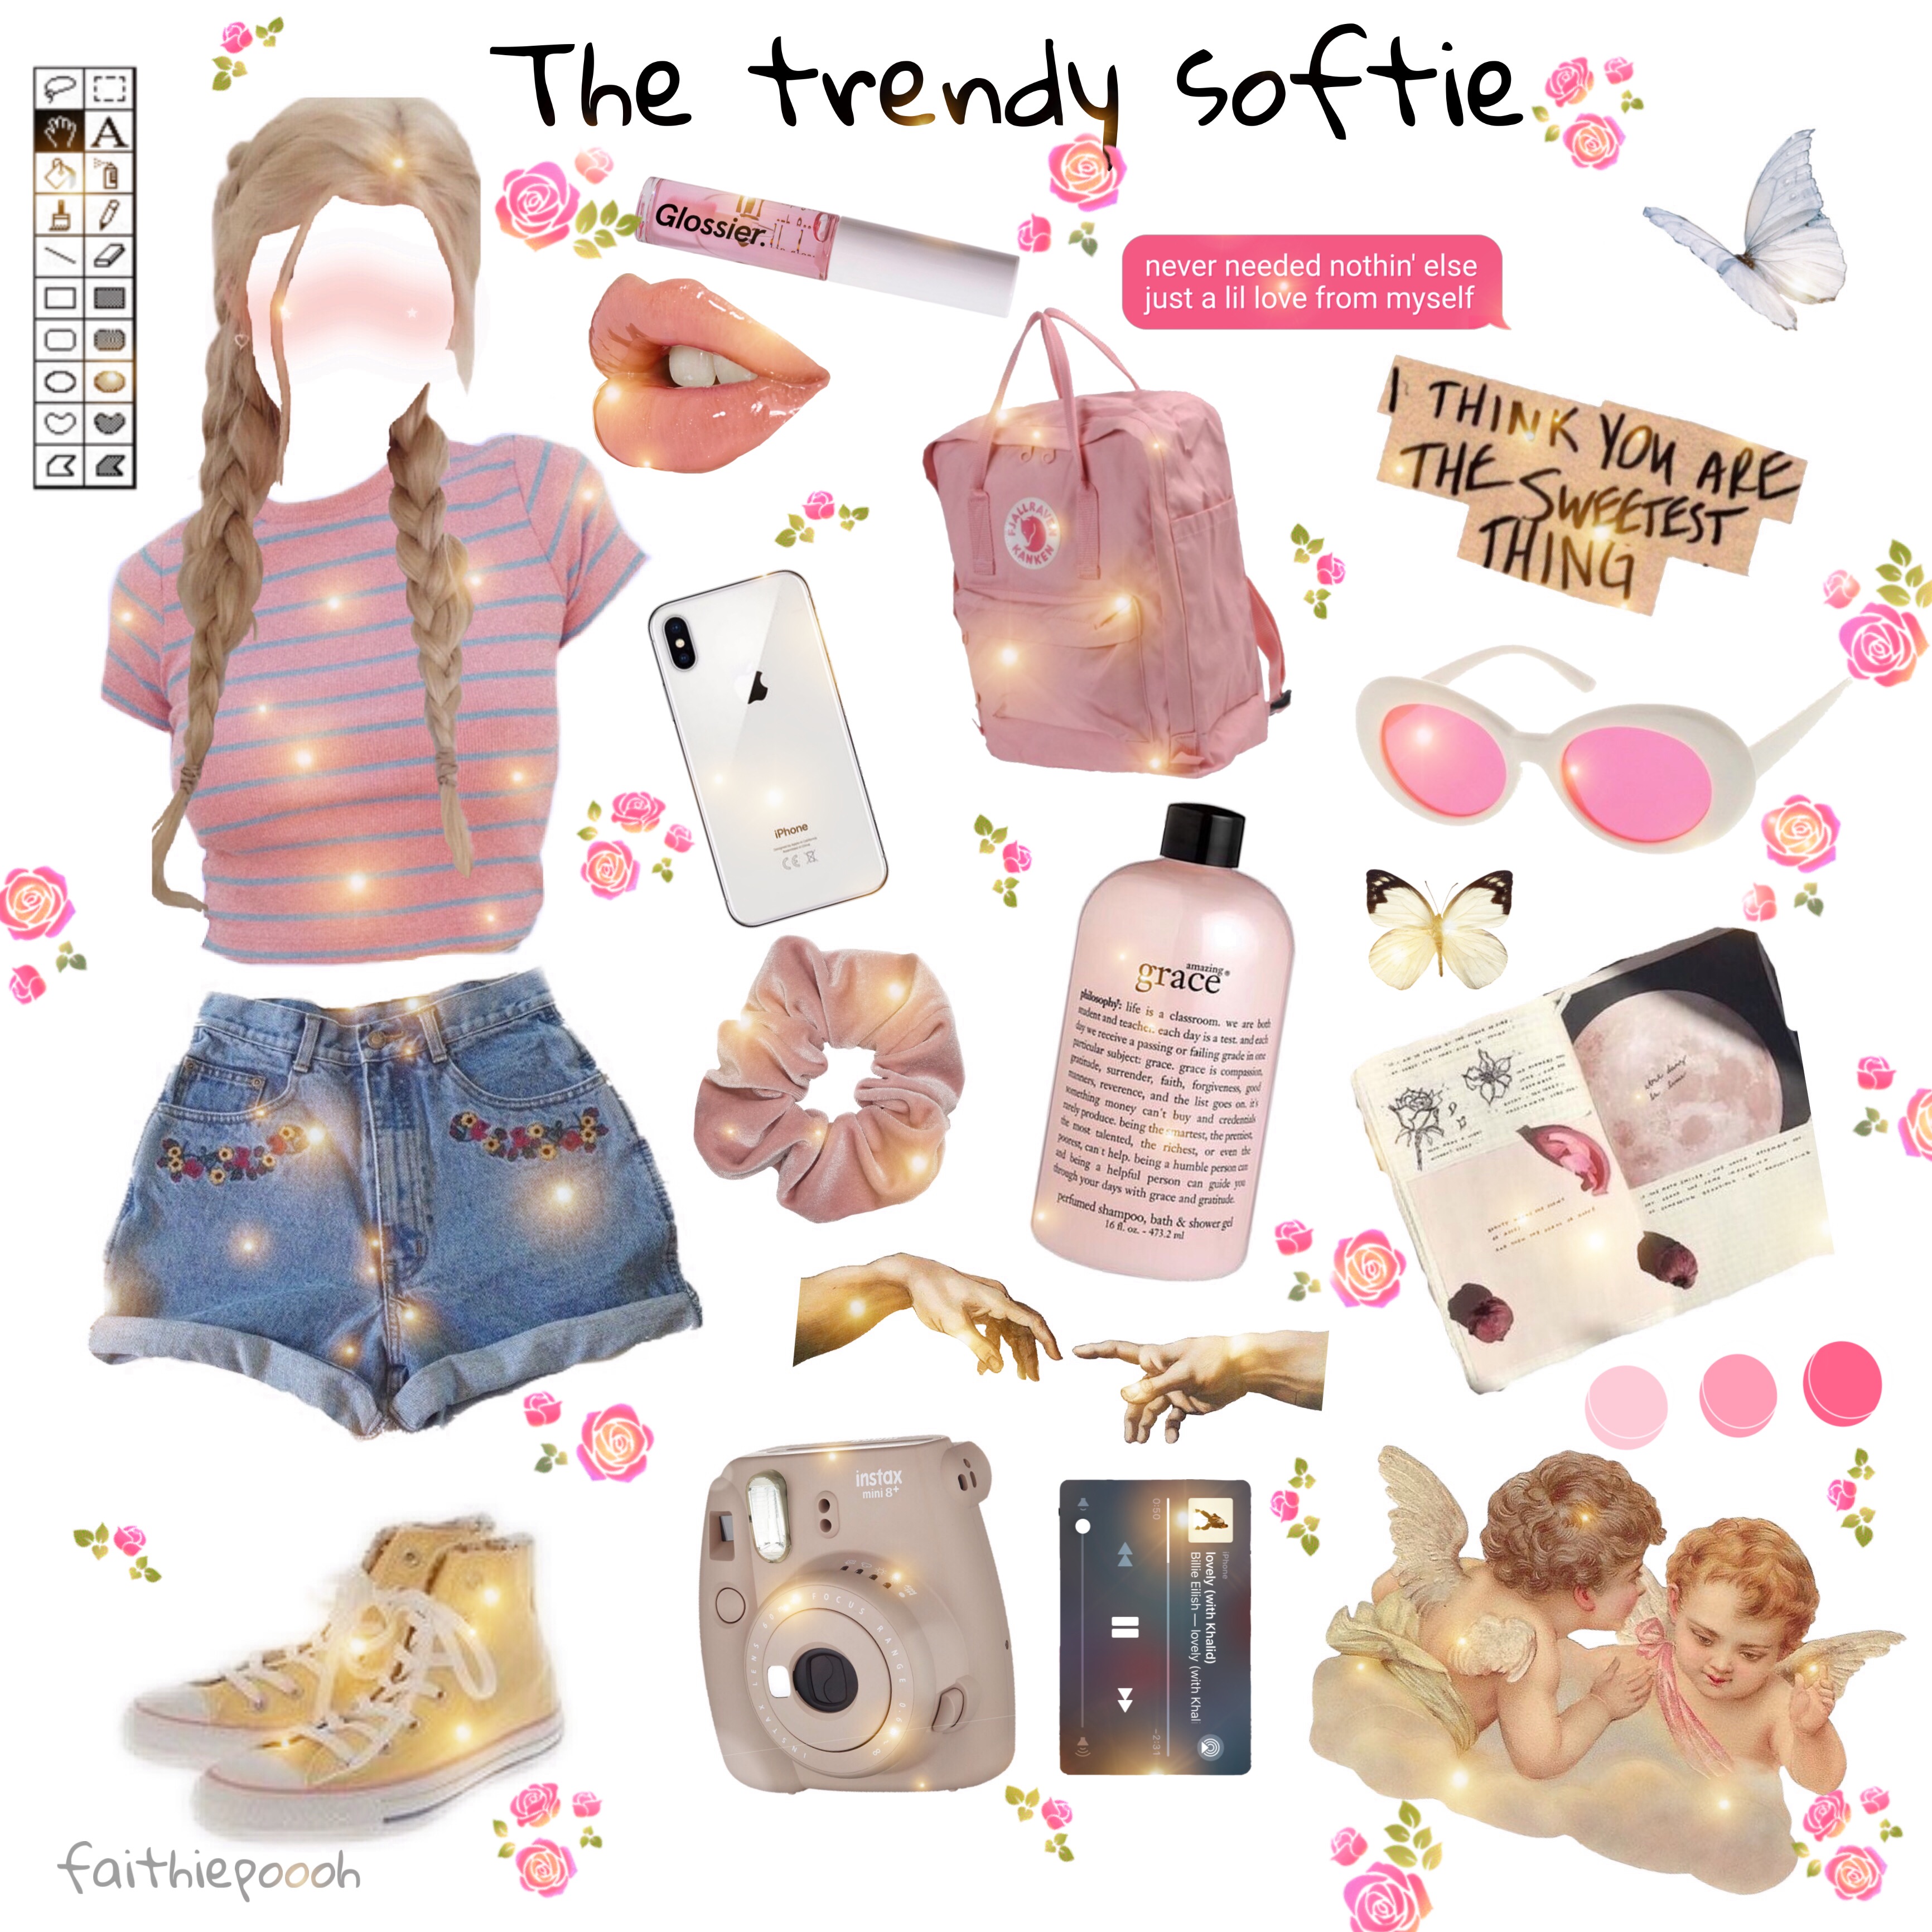 Aesthetic Pink Softie Soft Image By Faith